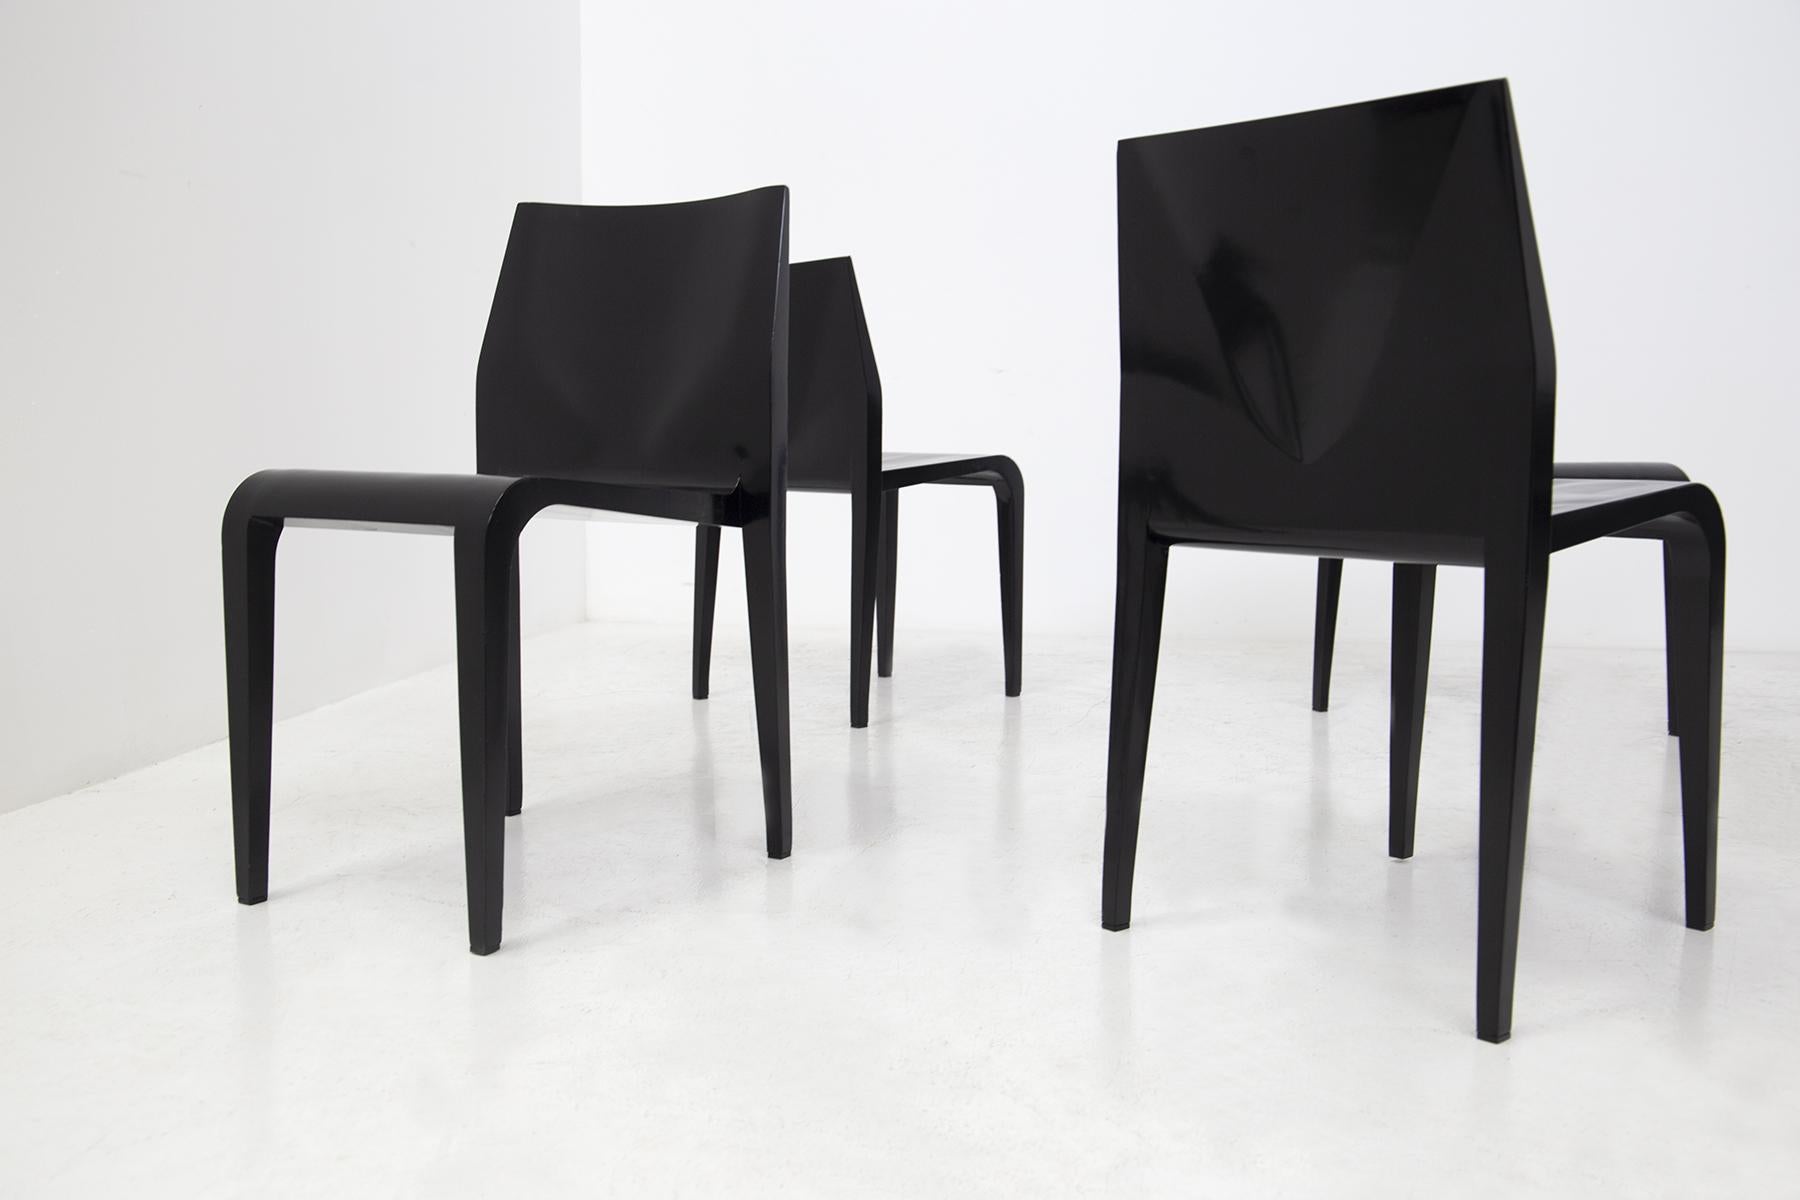 Wood Chairs Laleggera by Riccardo Blumer in Black Lacquered, 1997